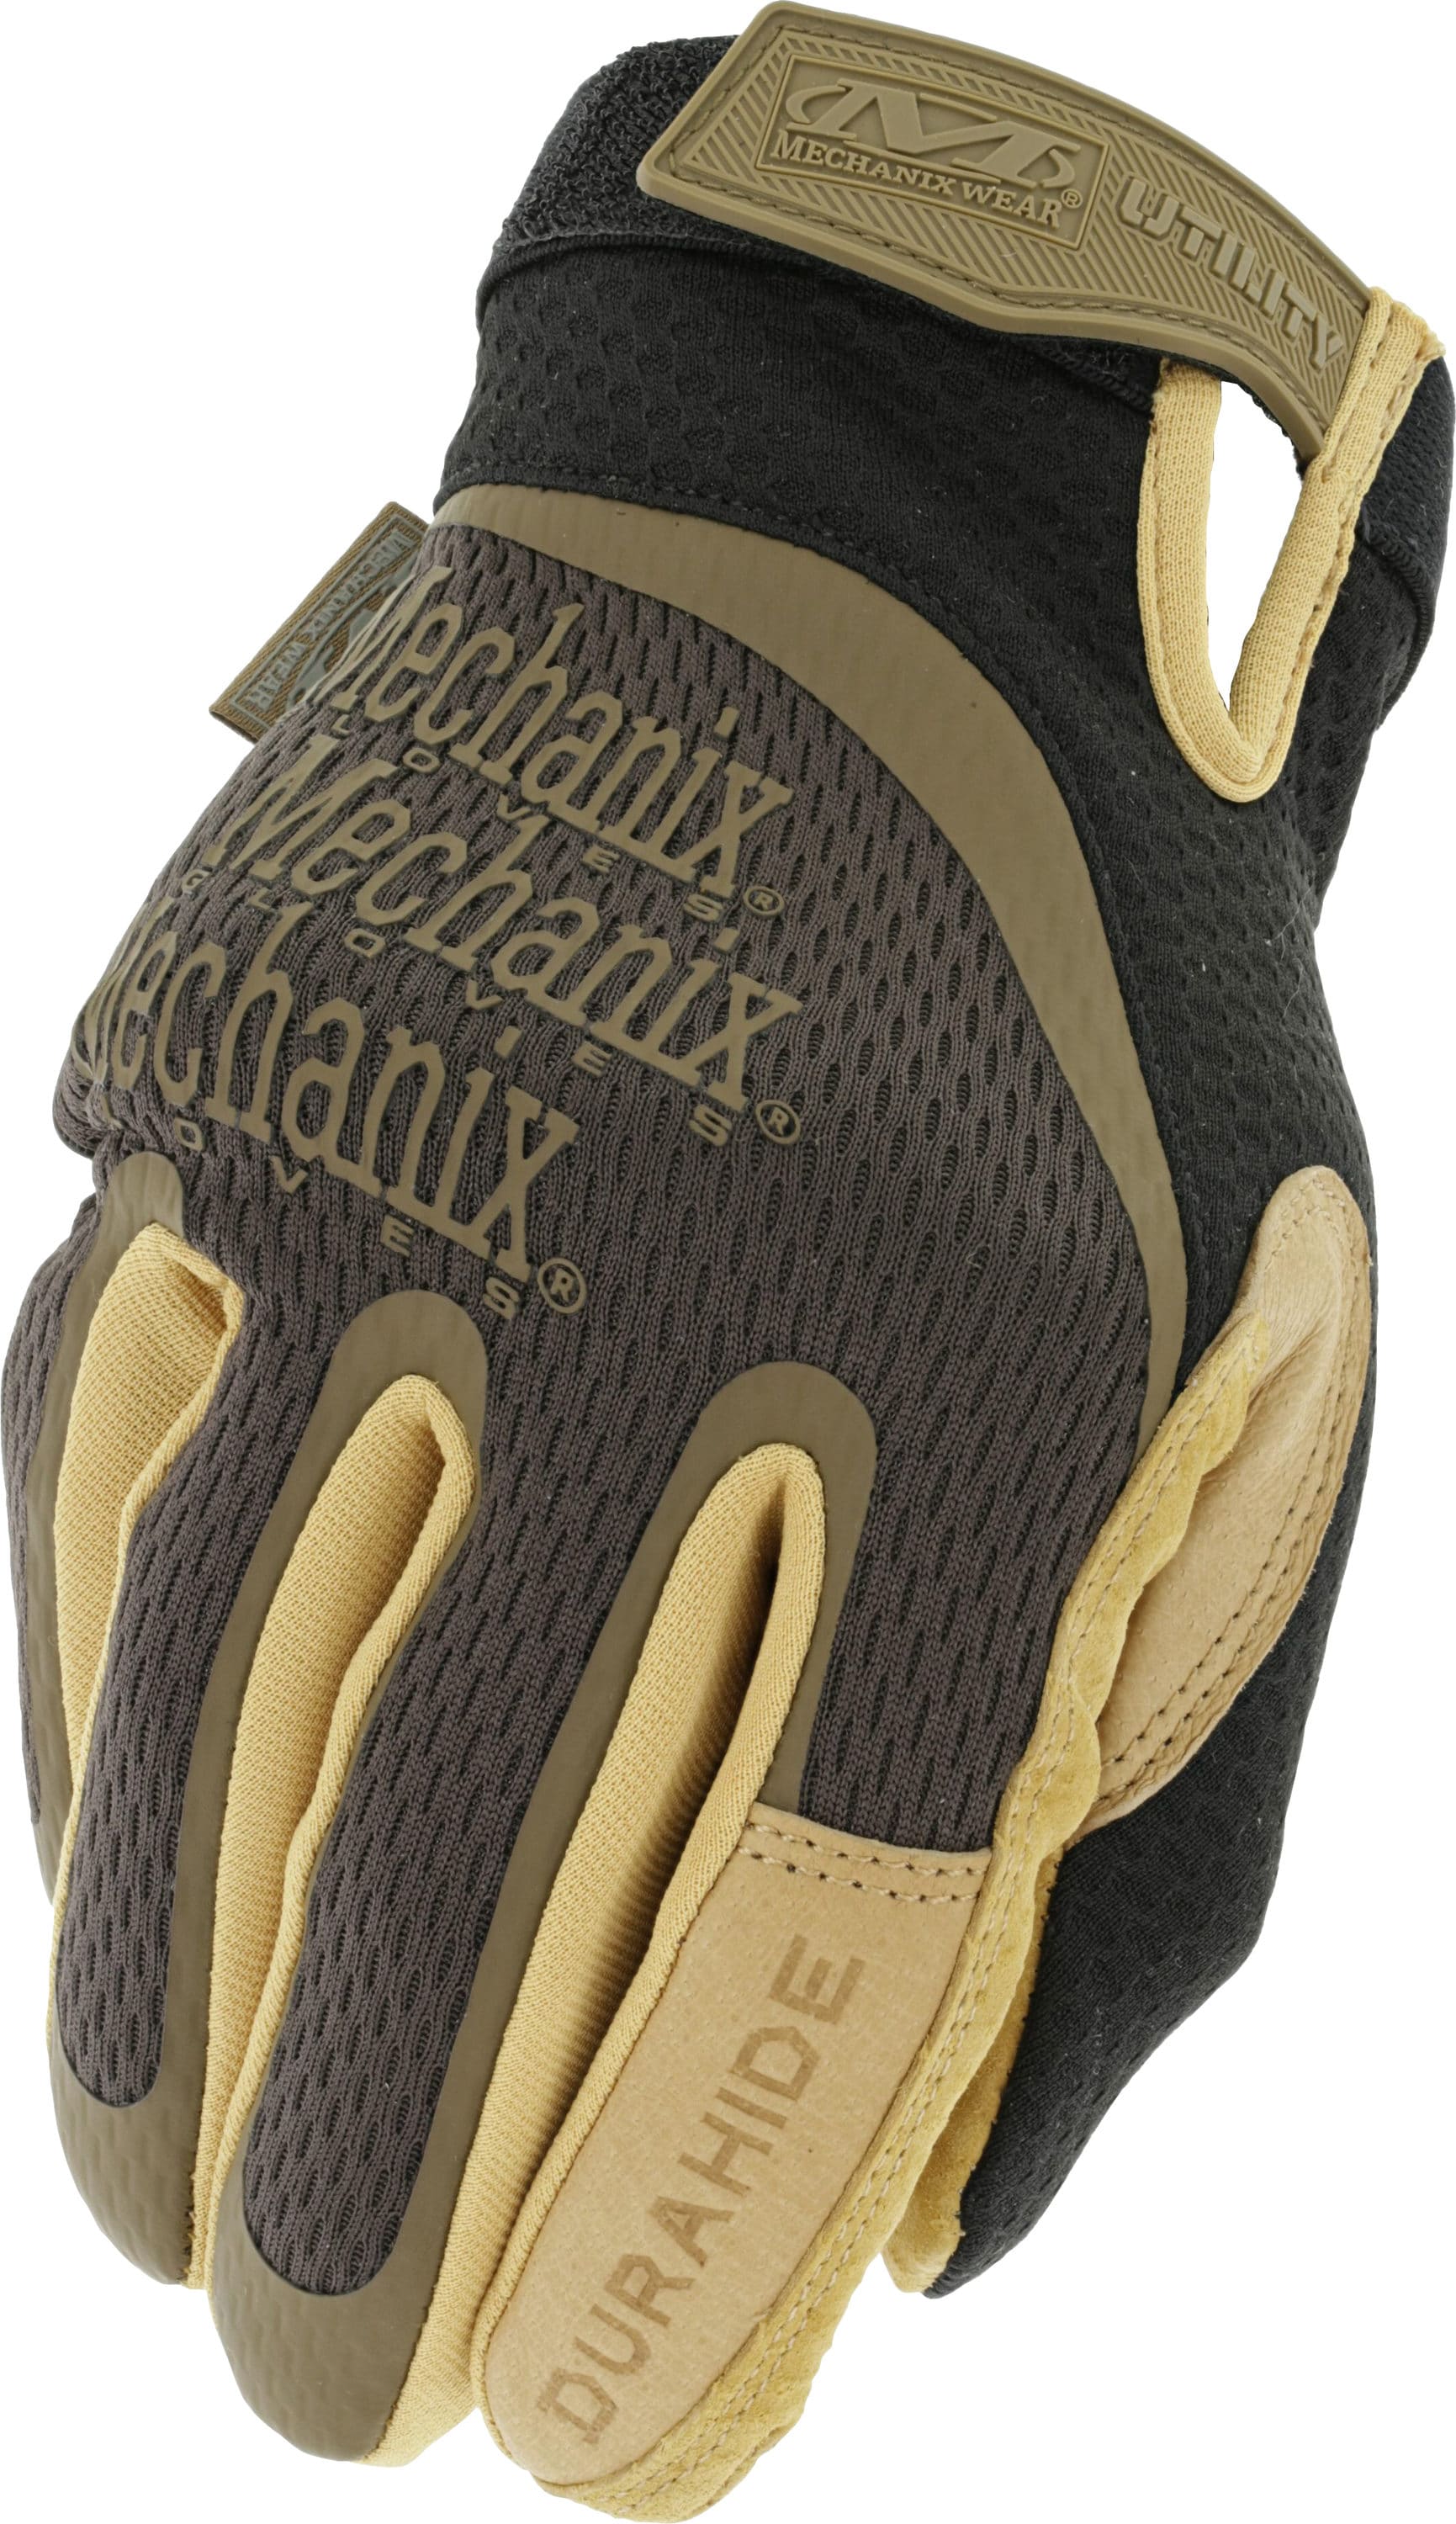 Mechanix Wear: The Original Durahide Leather Work Gloves with Secure Fit,  Utility Gloves for Multi-purpose Use, Abrasion Resistant, Added Durability